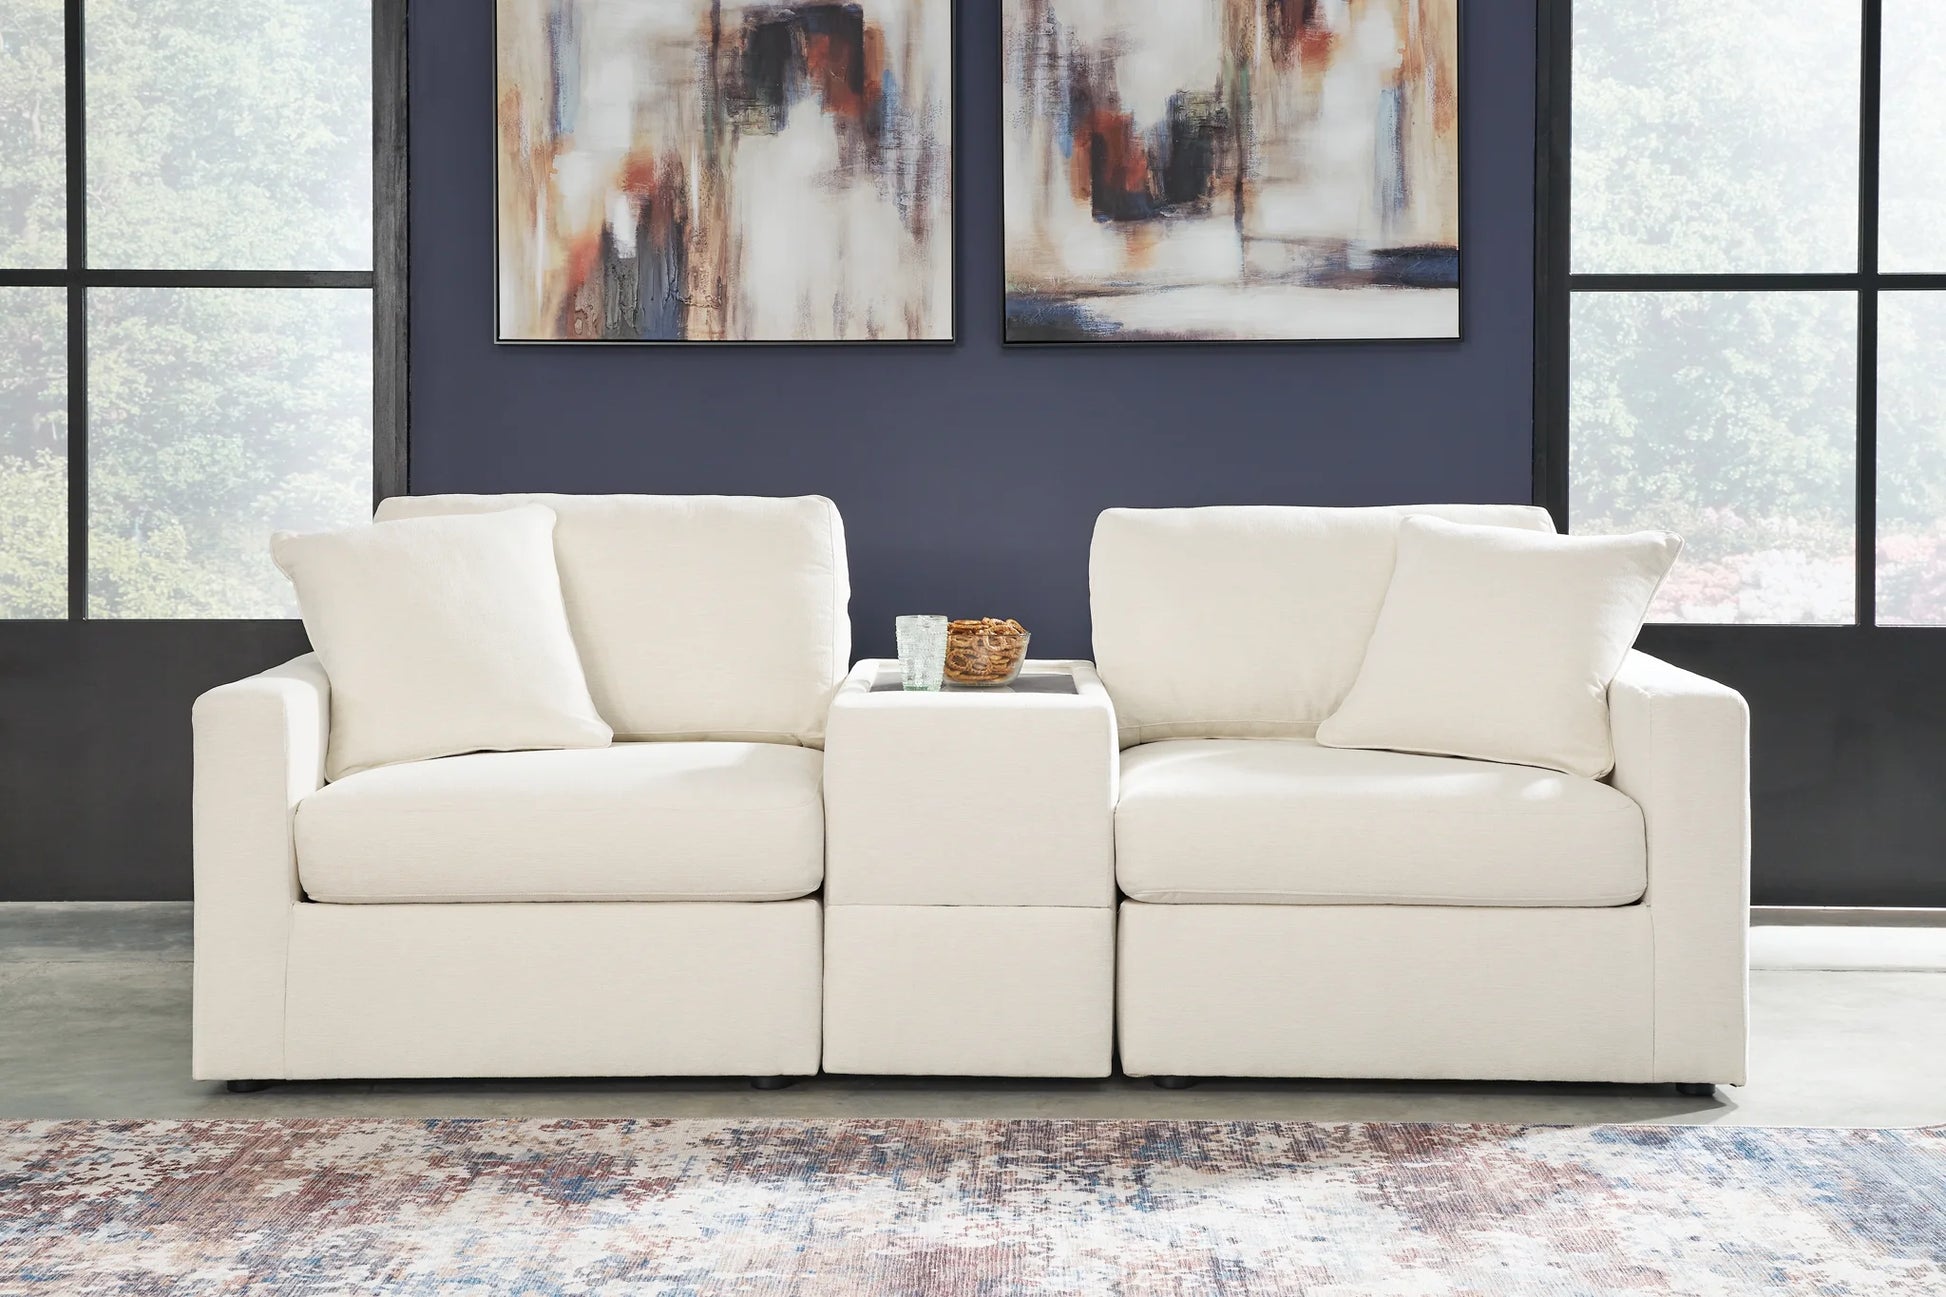 Modmax - Oyster - 3-Piece Sectional With Storage Console 1